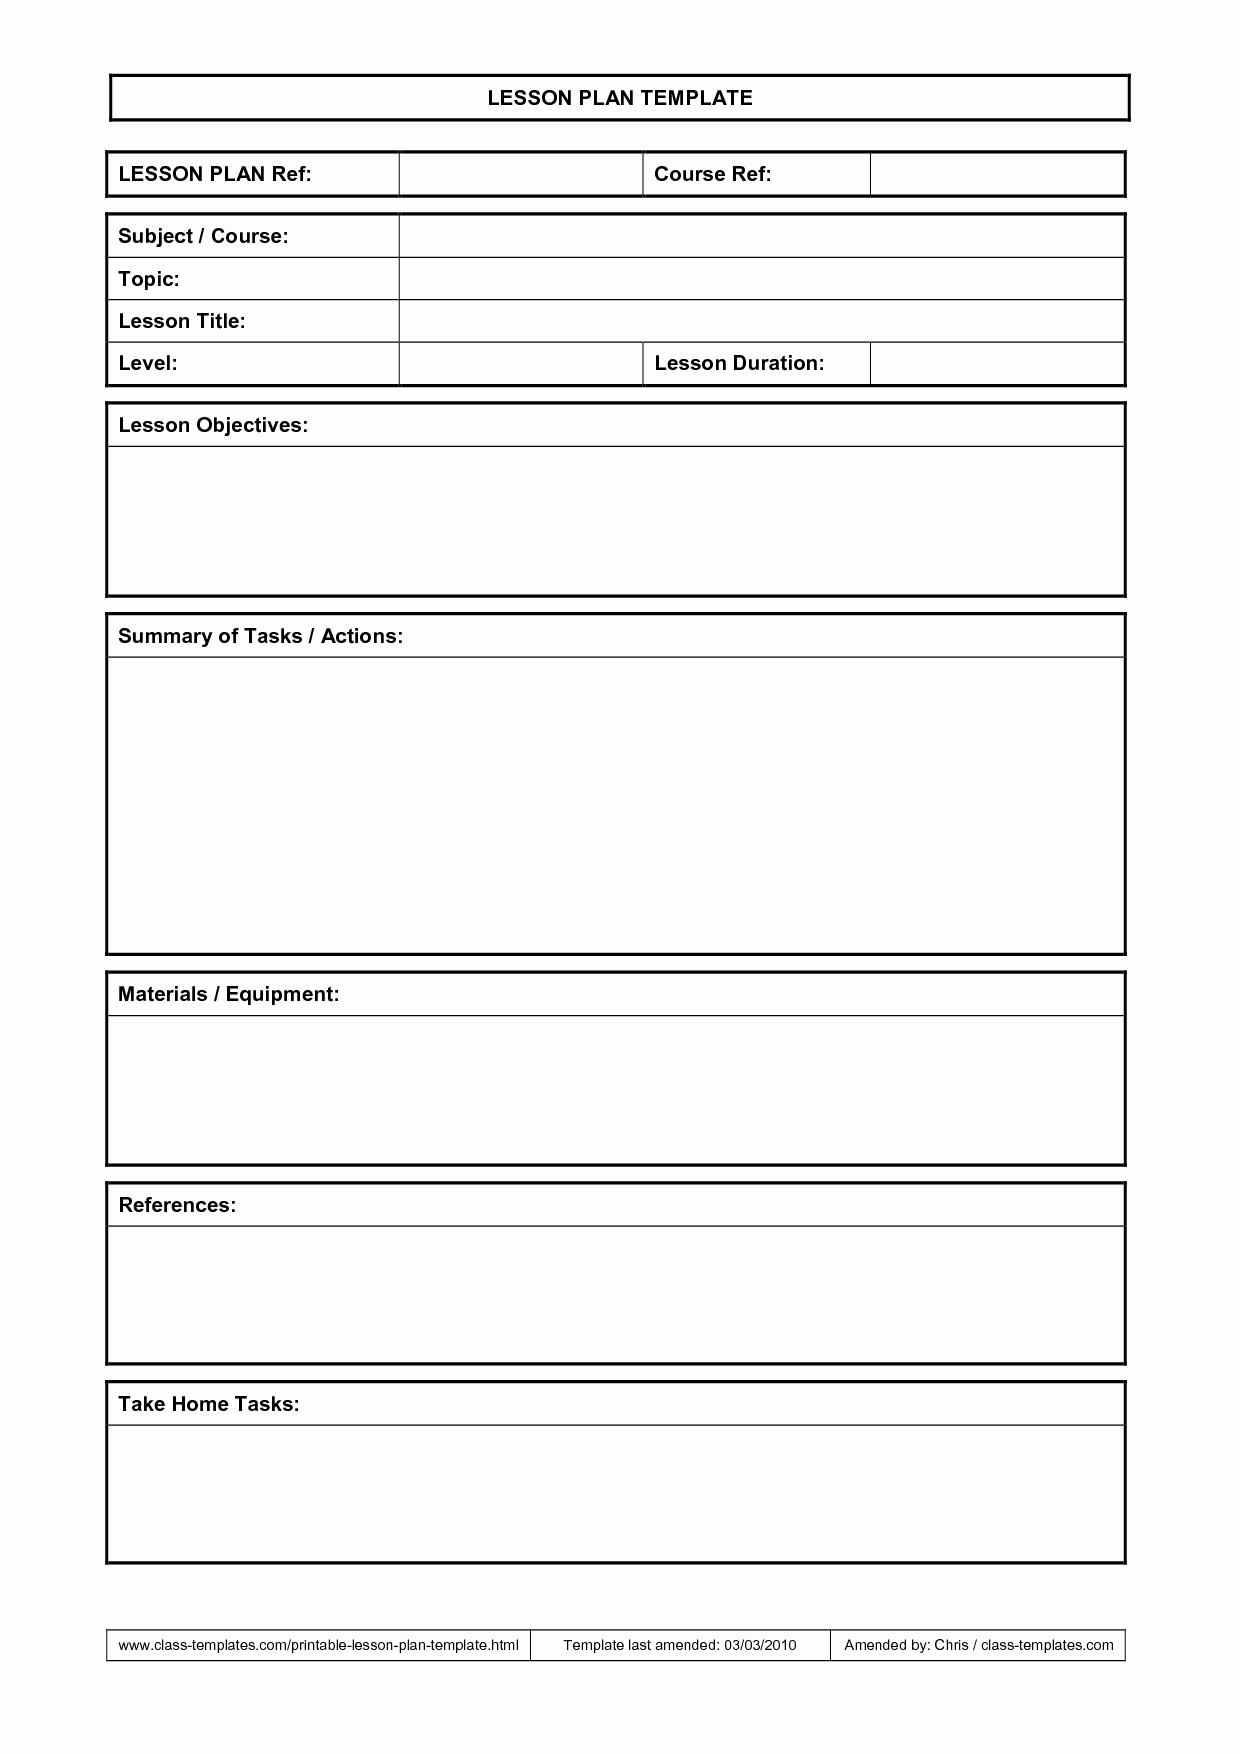 Secondary Lesson Plan Template Lovely Lesson Plan Template …